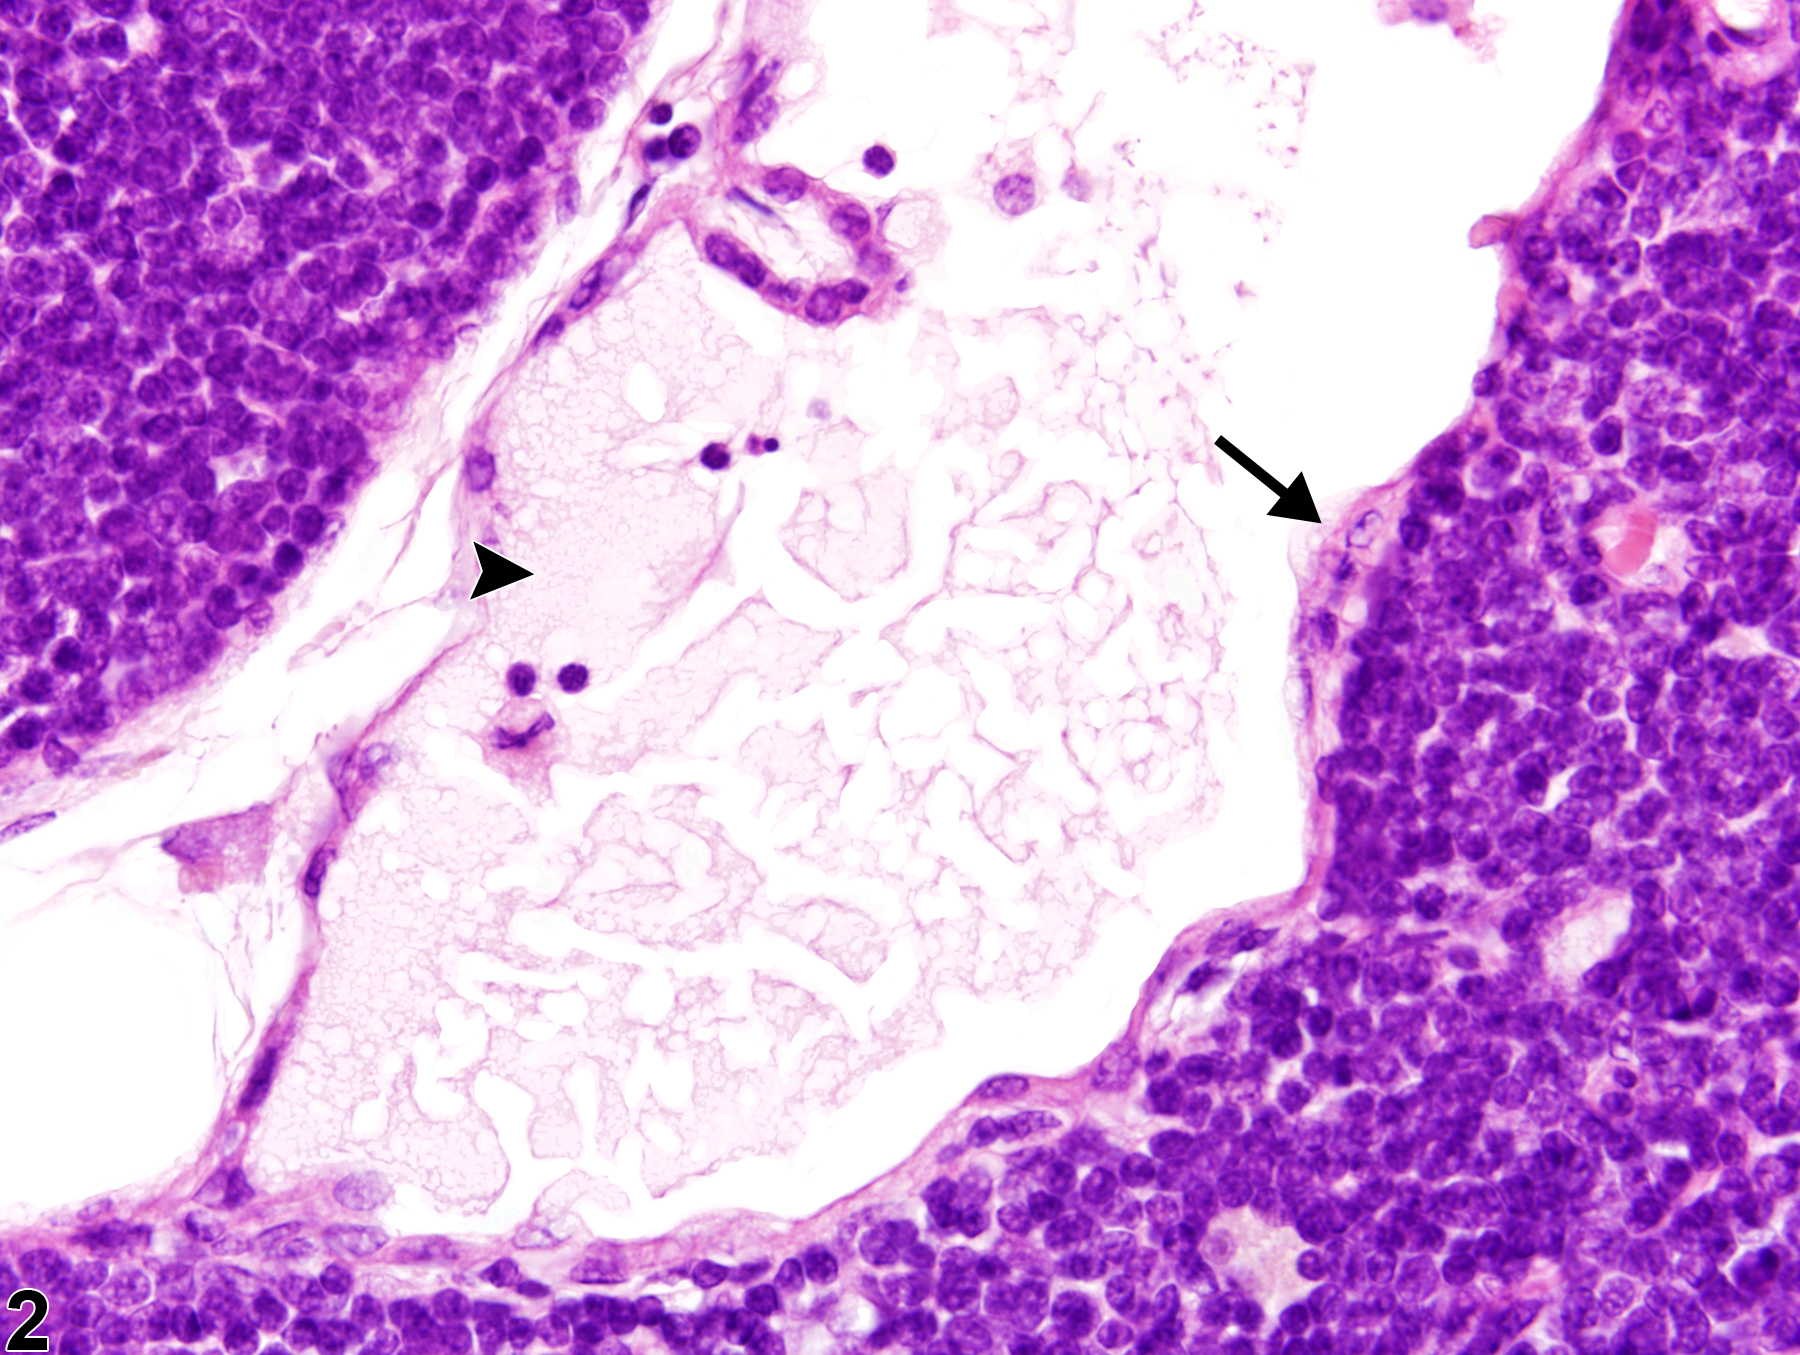 Image of cyst in the thymus from a female F344/N rat in a chronic study